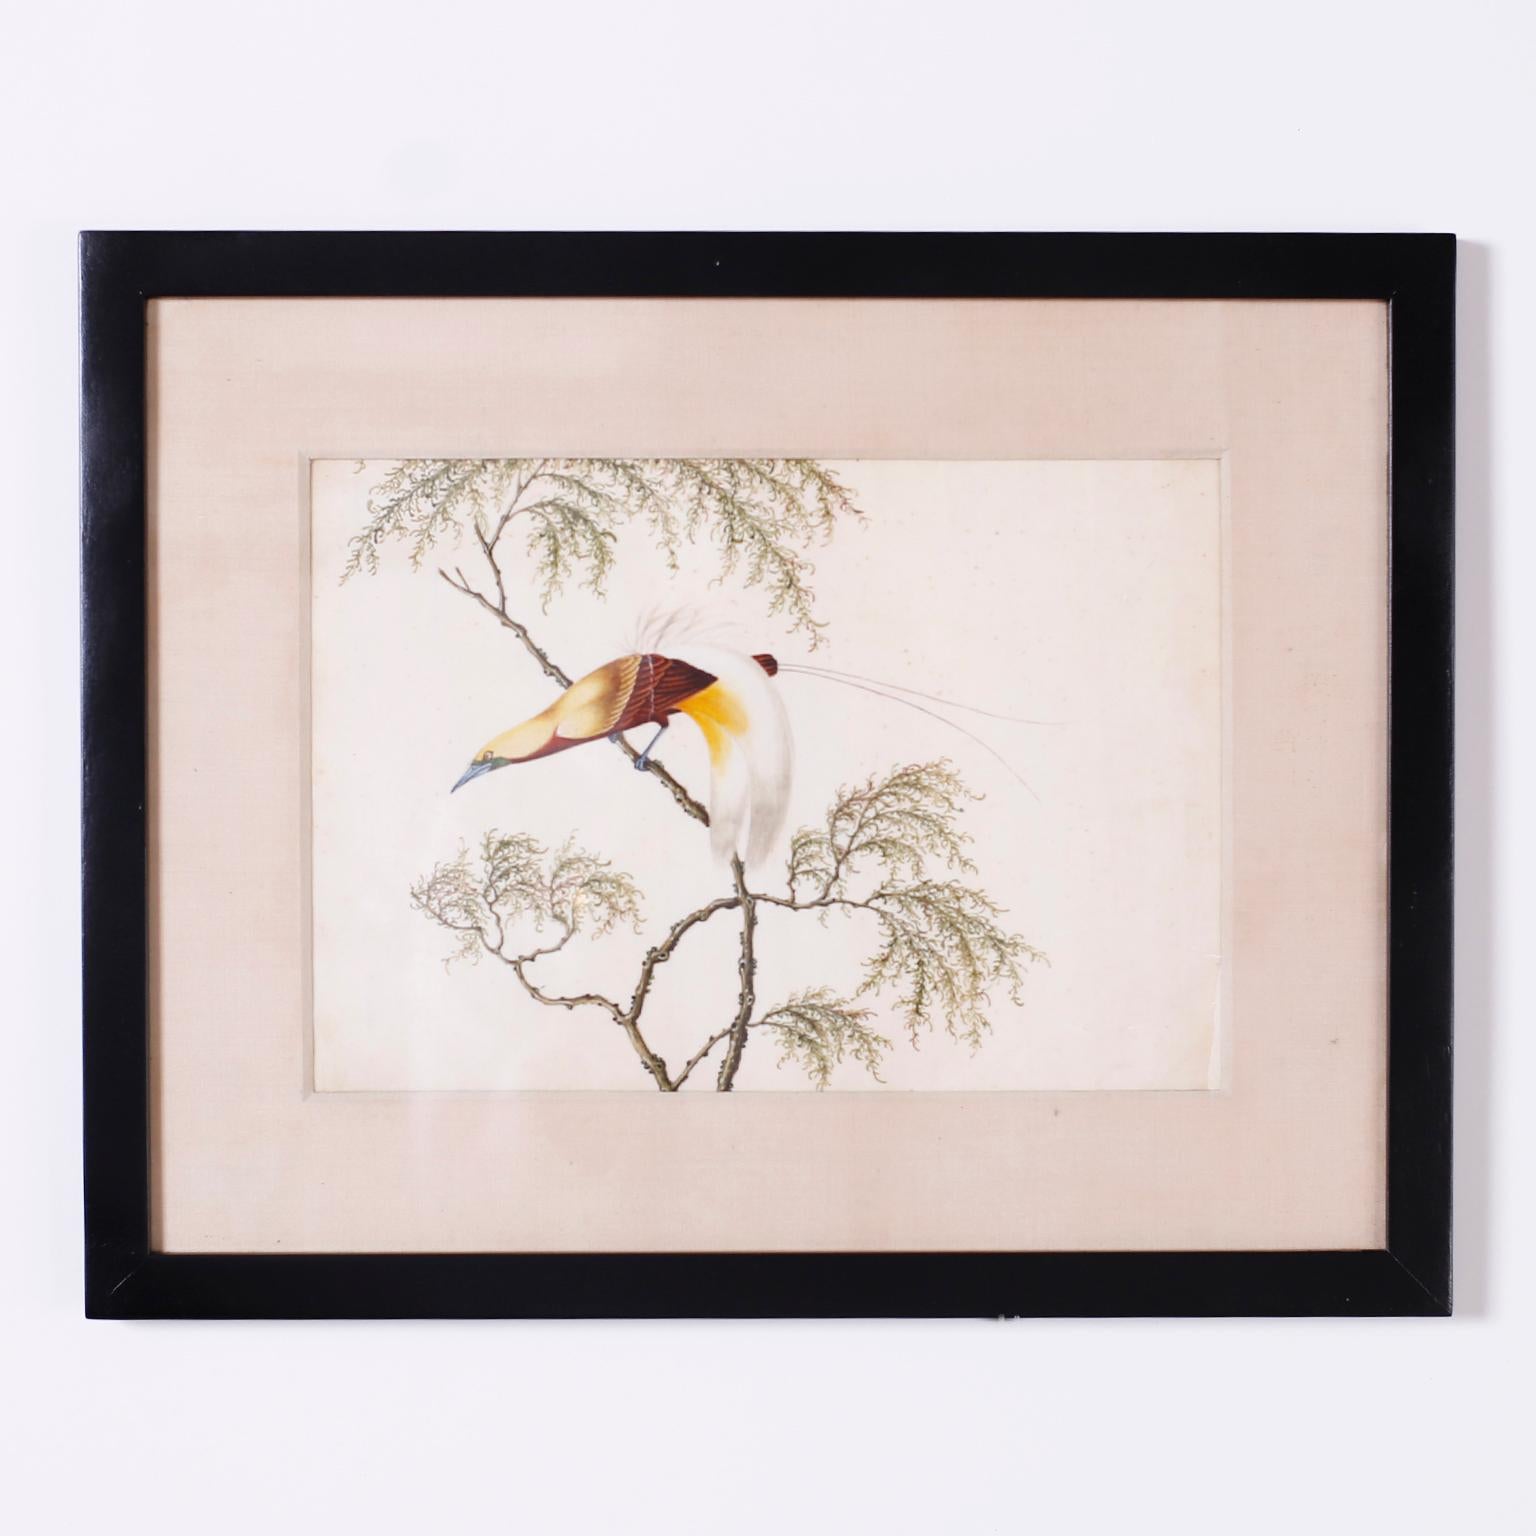 Set of six Chinese watercolors on paper of song birds in trees executed in a distinctive delicate style with bold colors. Presented in wood frames under glass.